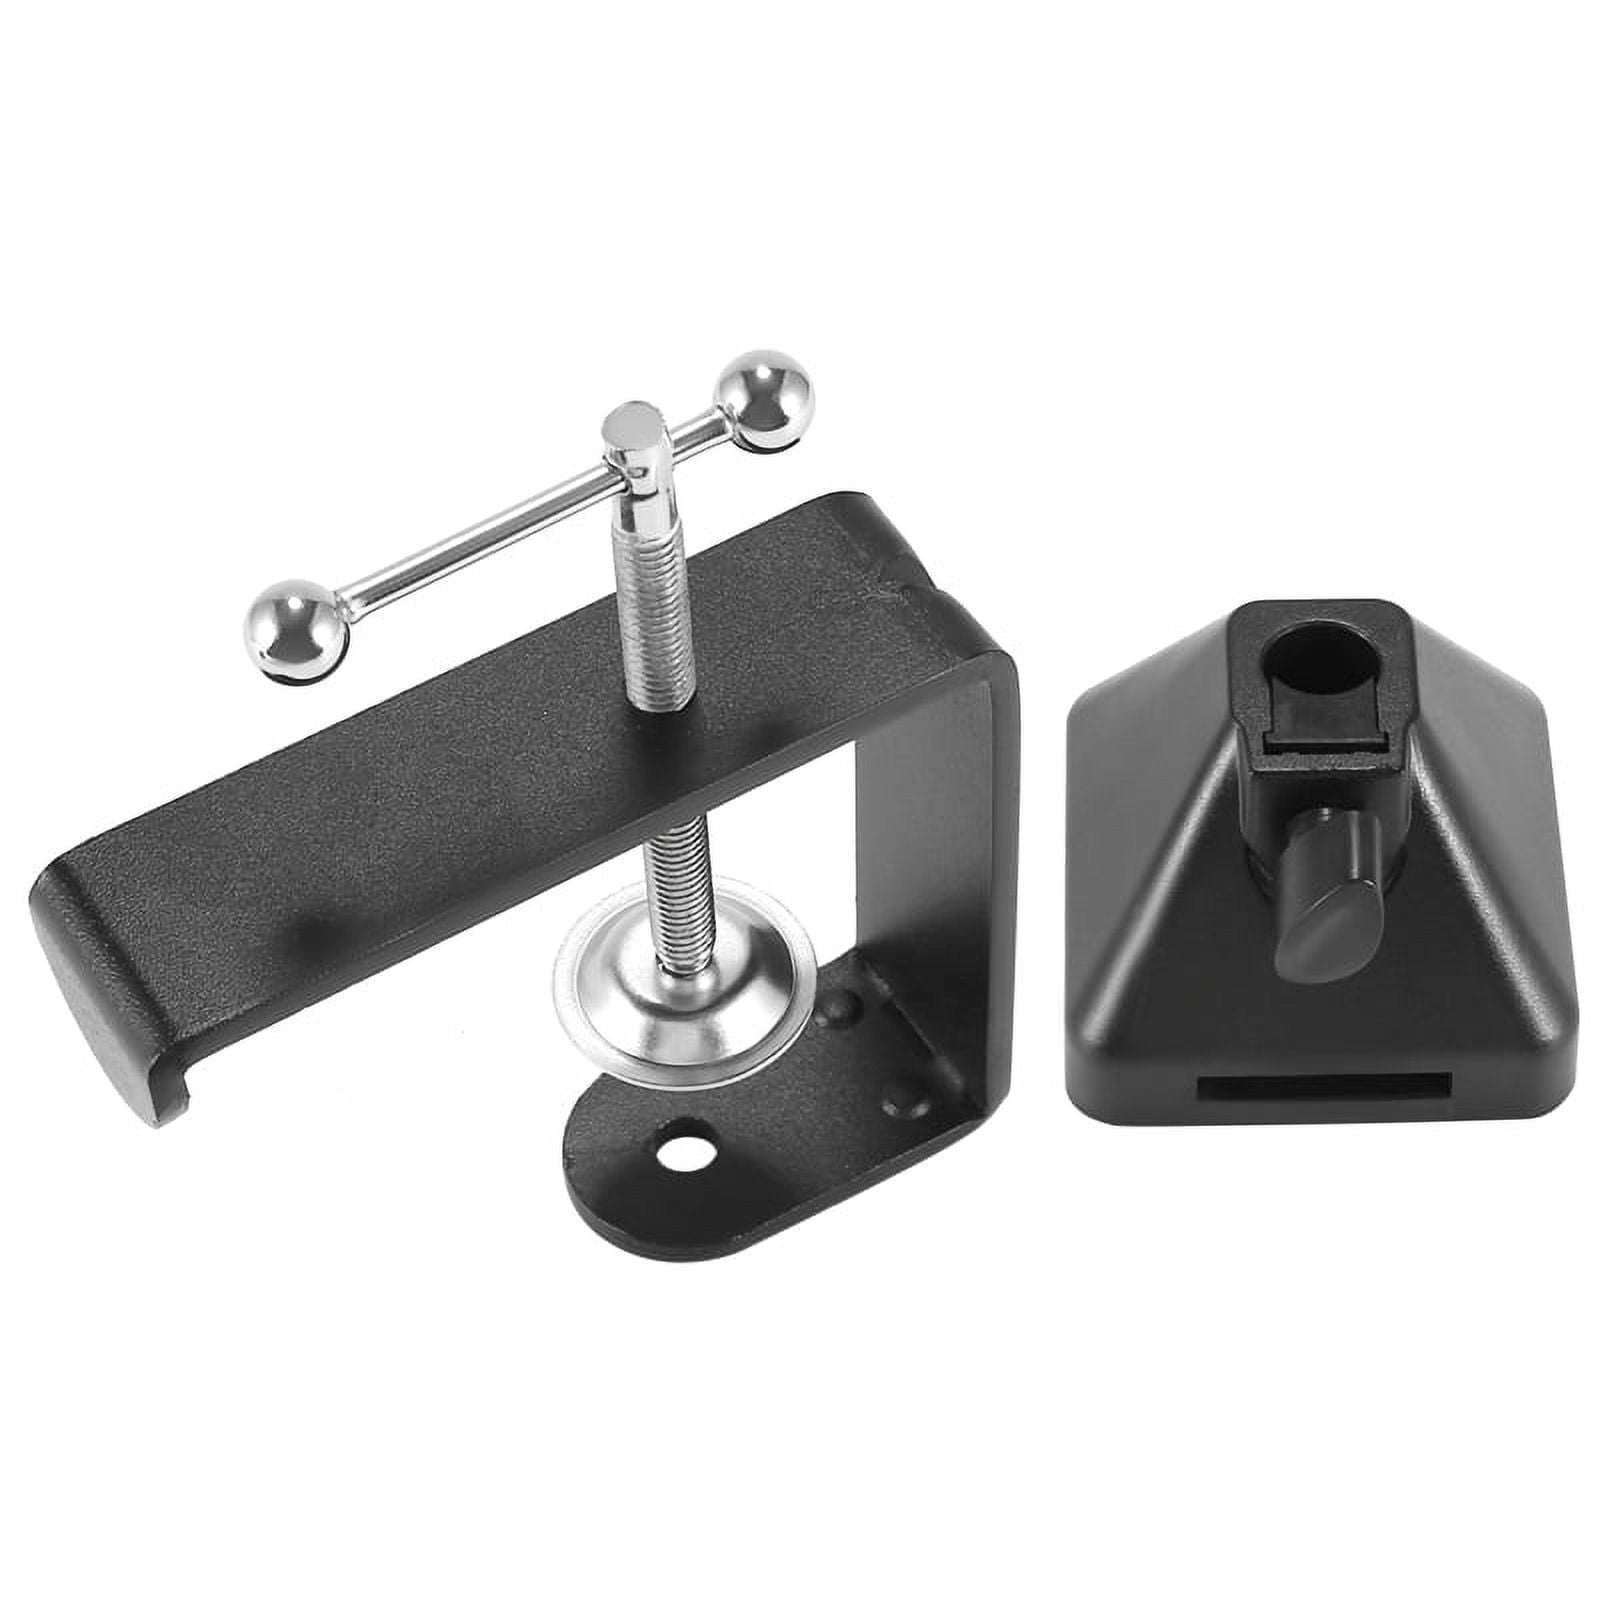 Heavy-Duty Table Mount Clamp, C Mounting Clamp Holder with Headset Hook ...